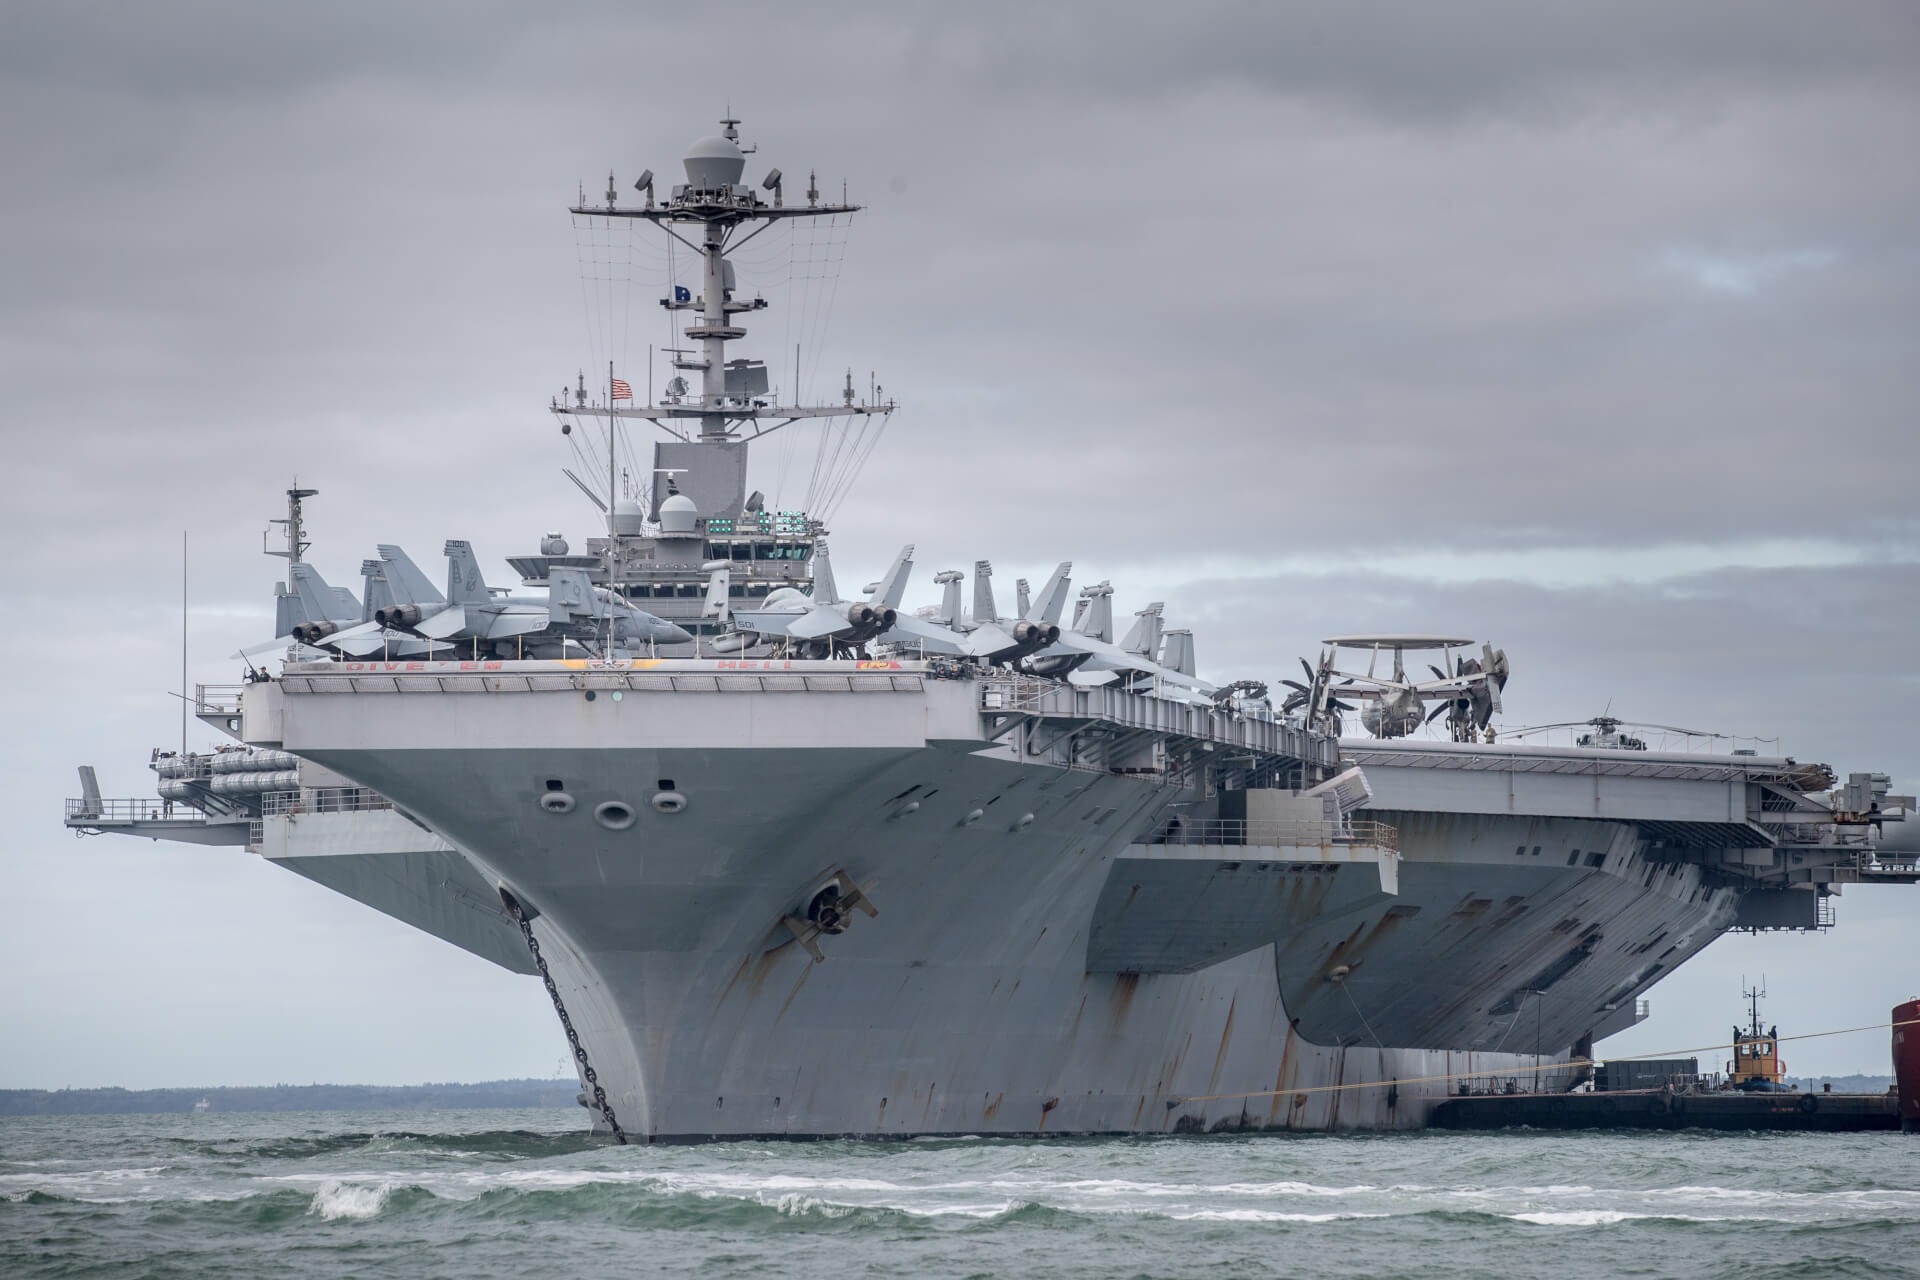 Most U.S. aircraft carriers sit idle in Virginia ports